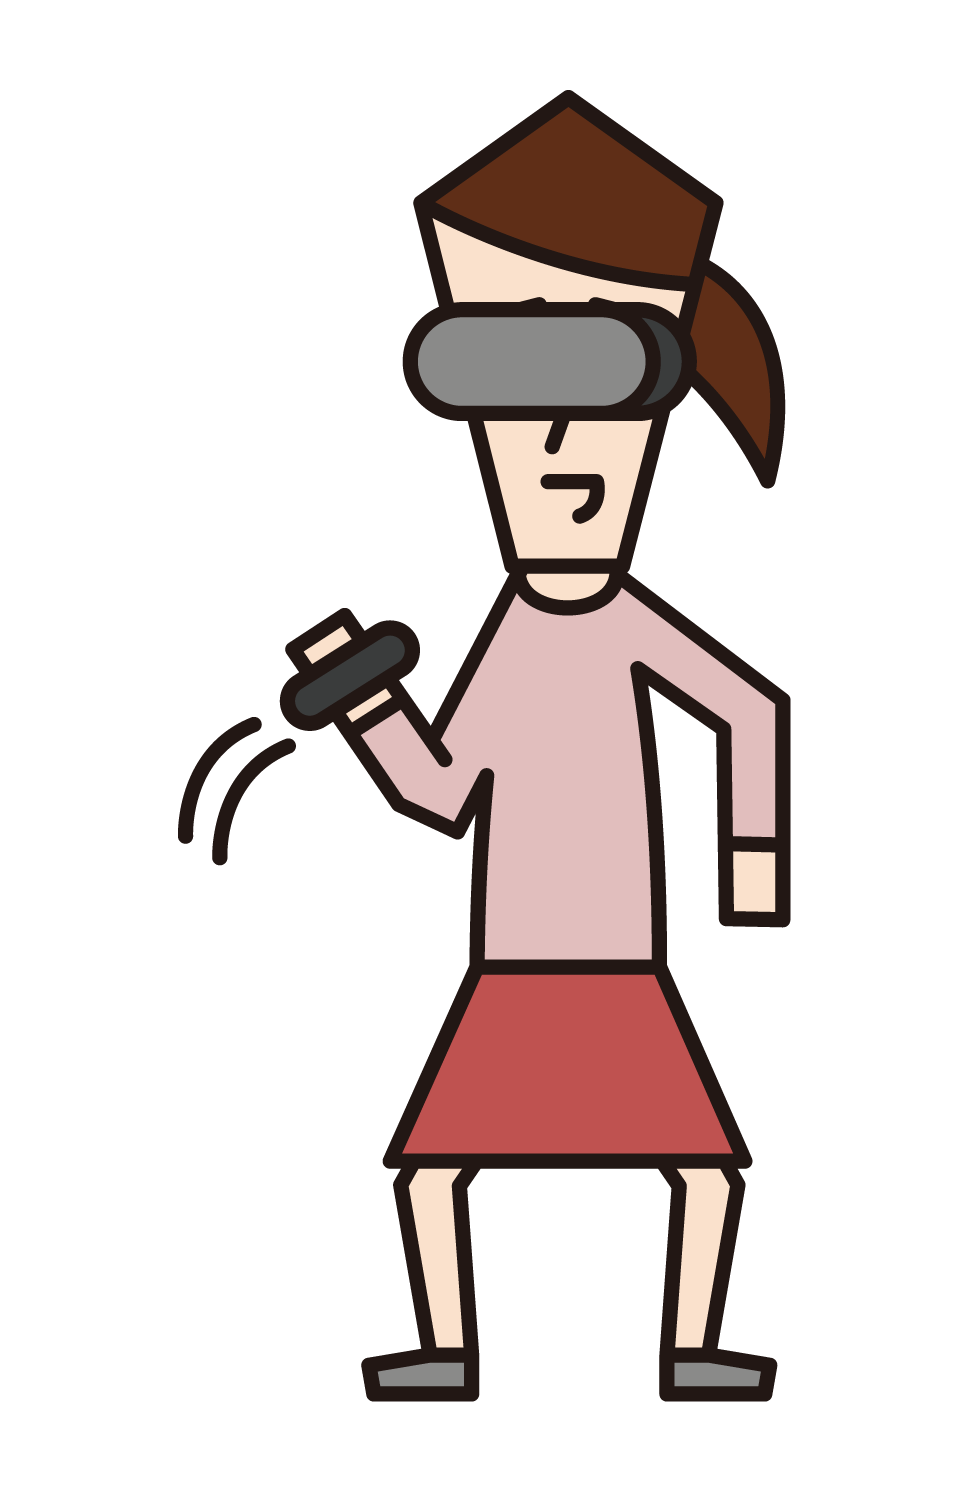 Illustration of a woman who enjoys VR